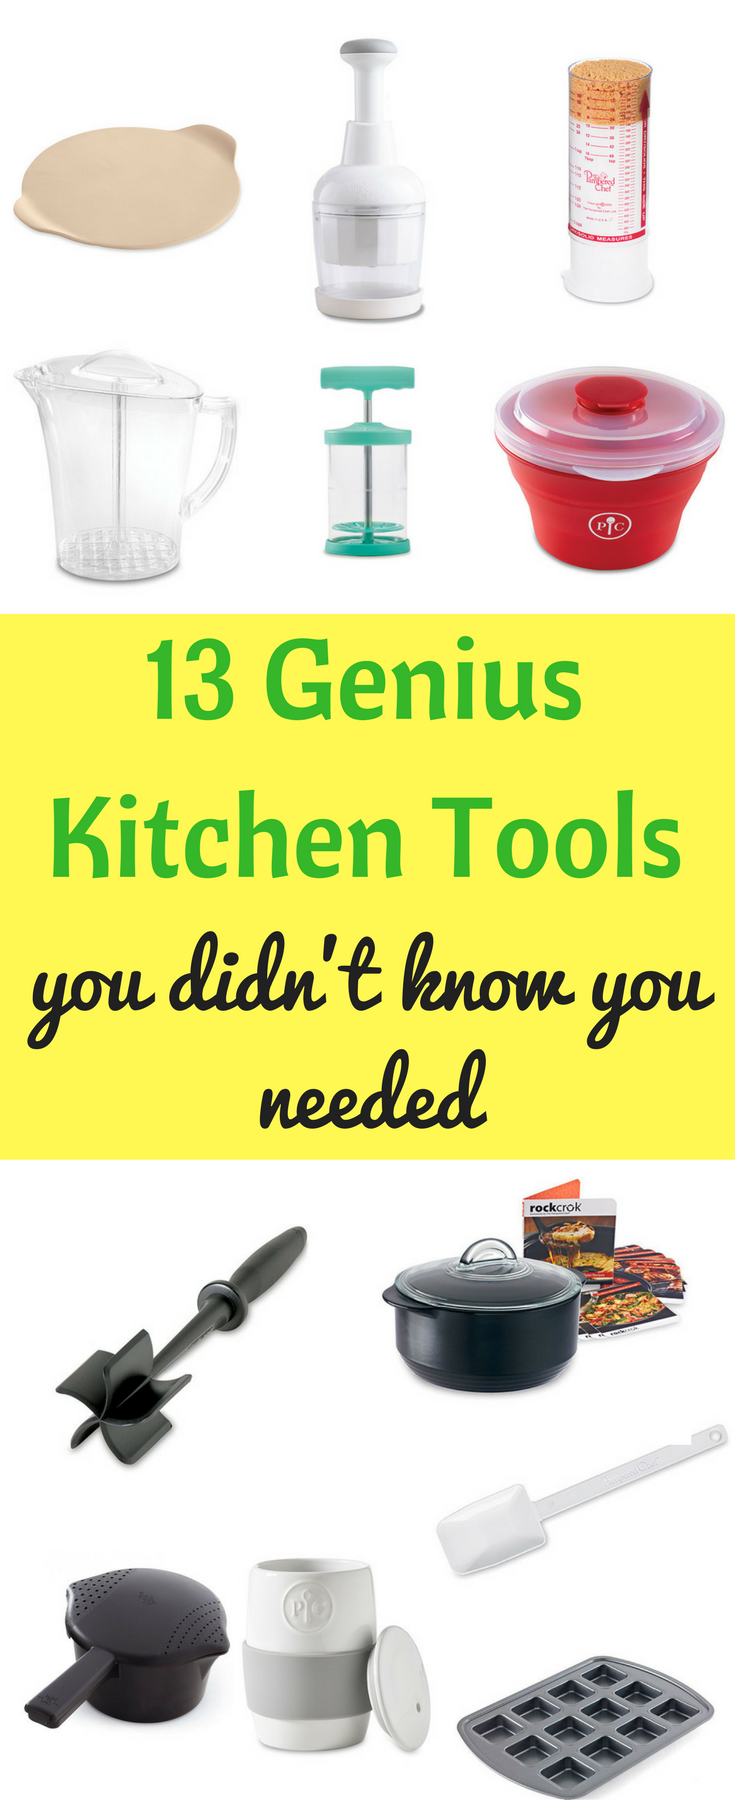 The Best New Kitchen Gadgets You Didn't Know You Needed